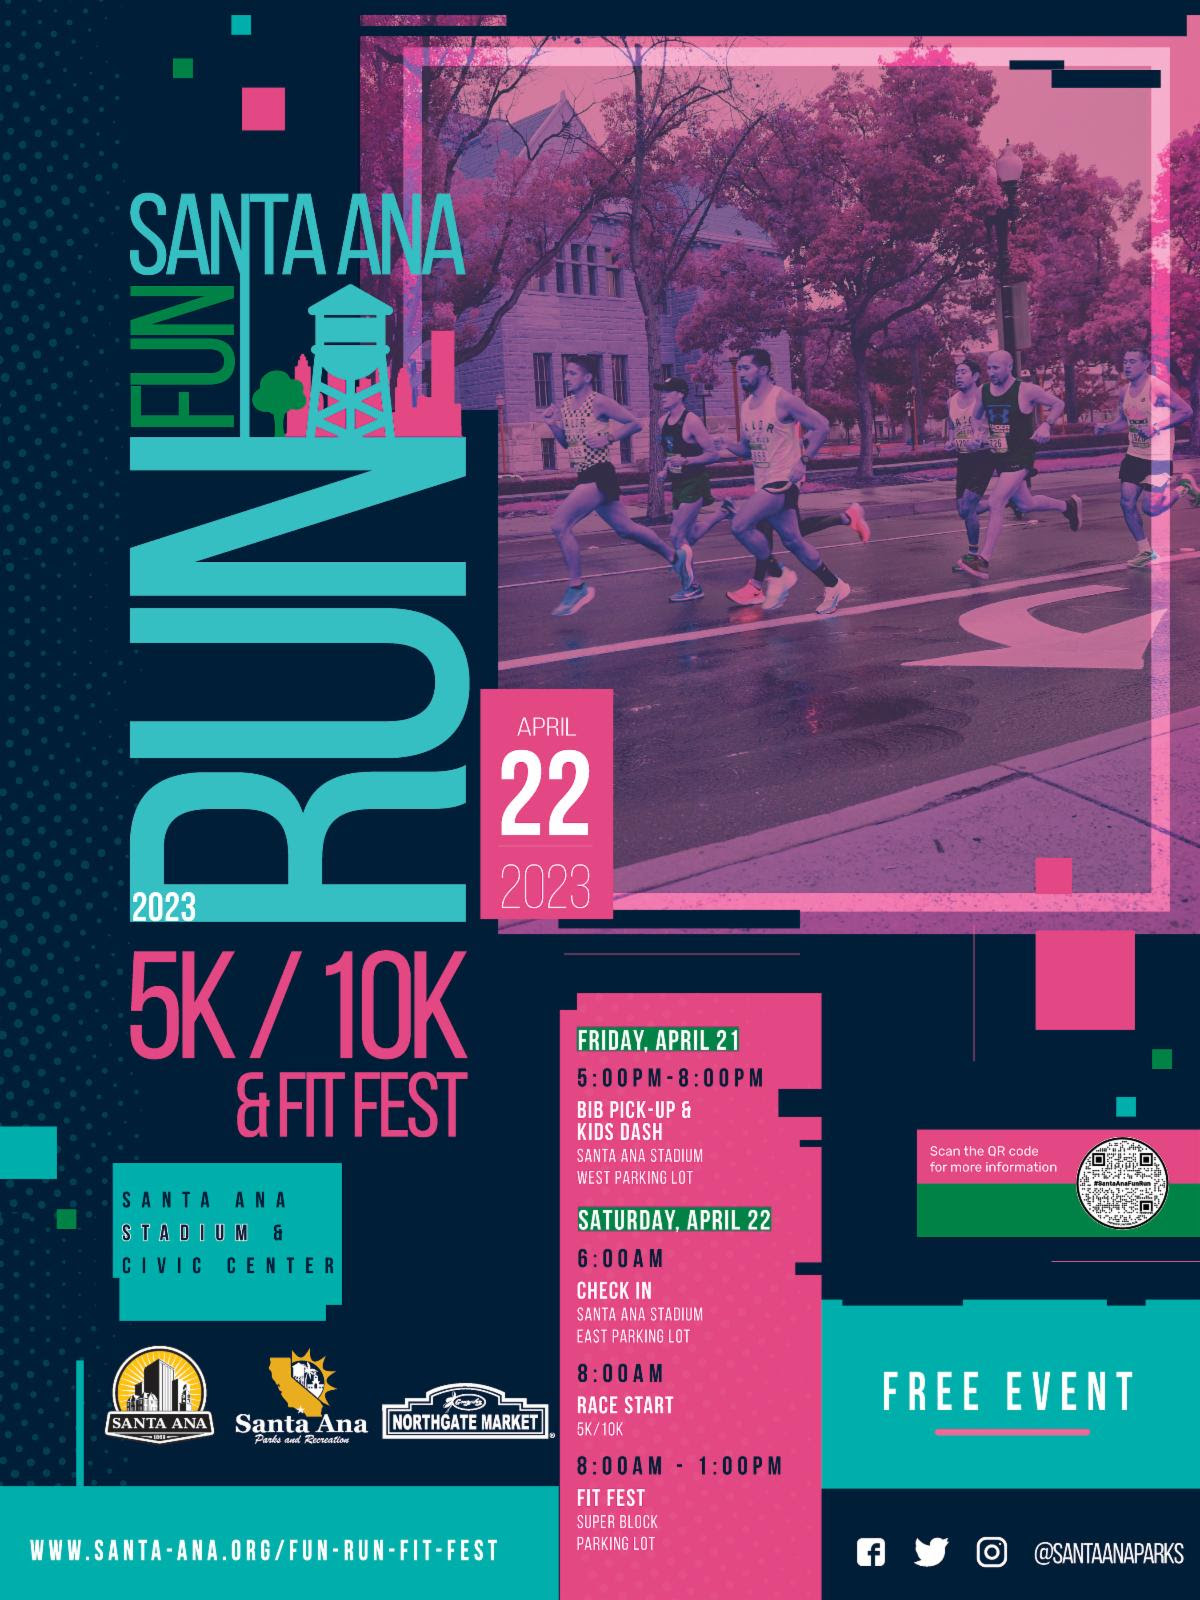 The 2023 Santa Ana 5 and 10K Run and Fit Fest is set for April 2122